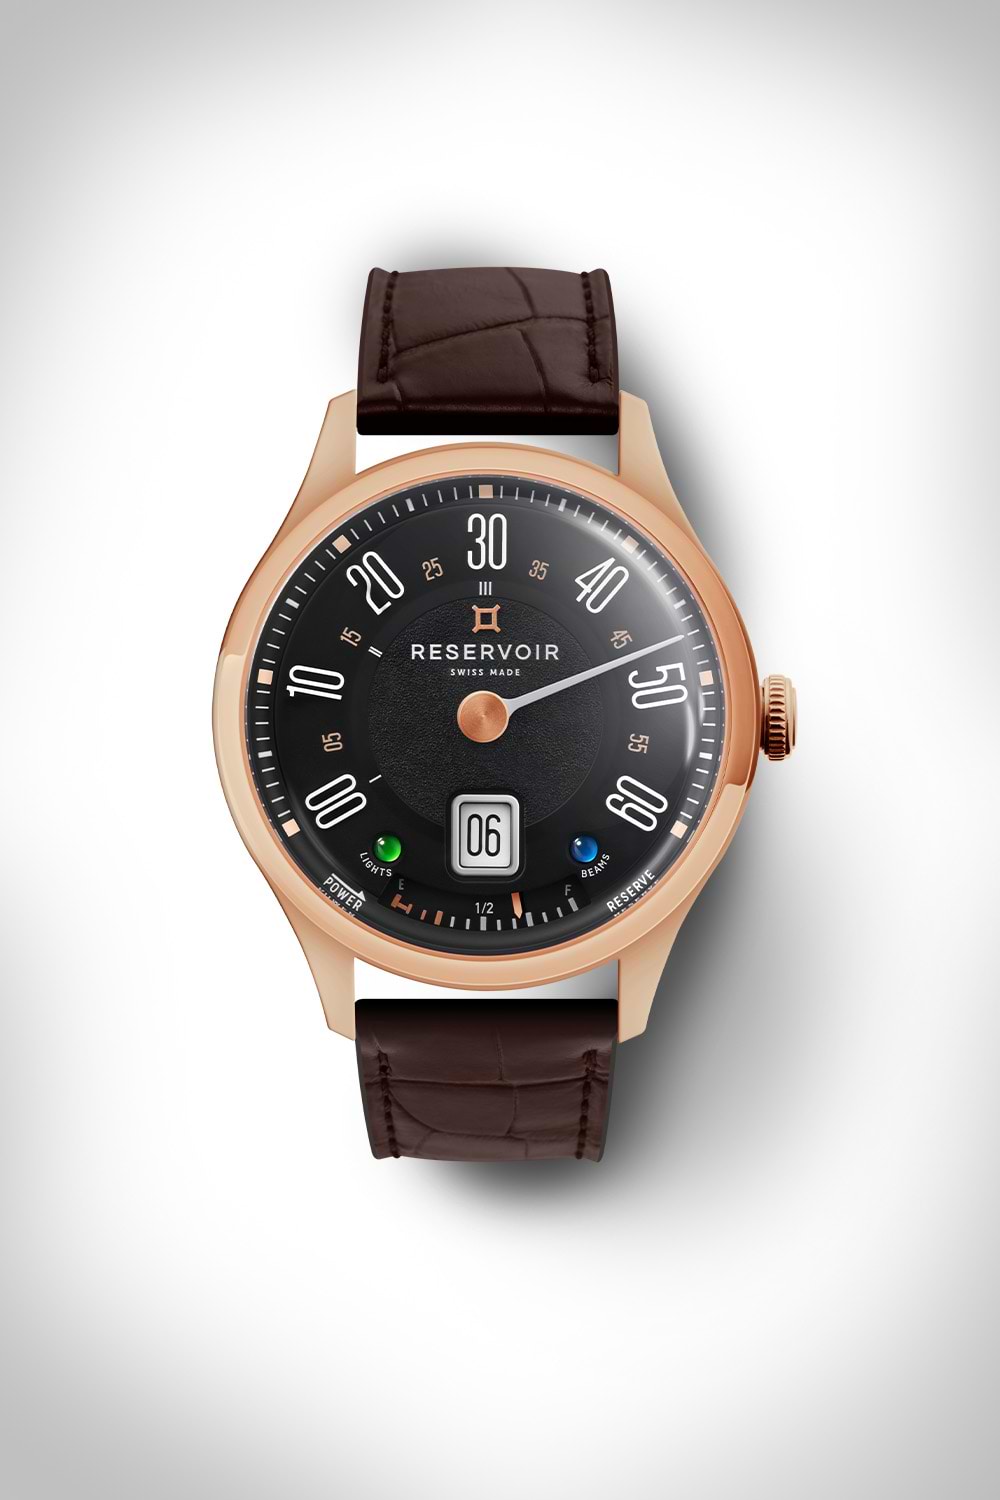 Rose gold wristwatch with dark brown leather strap, black dial, and digital date display.